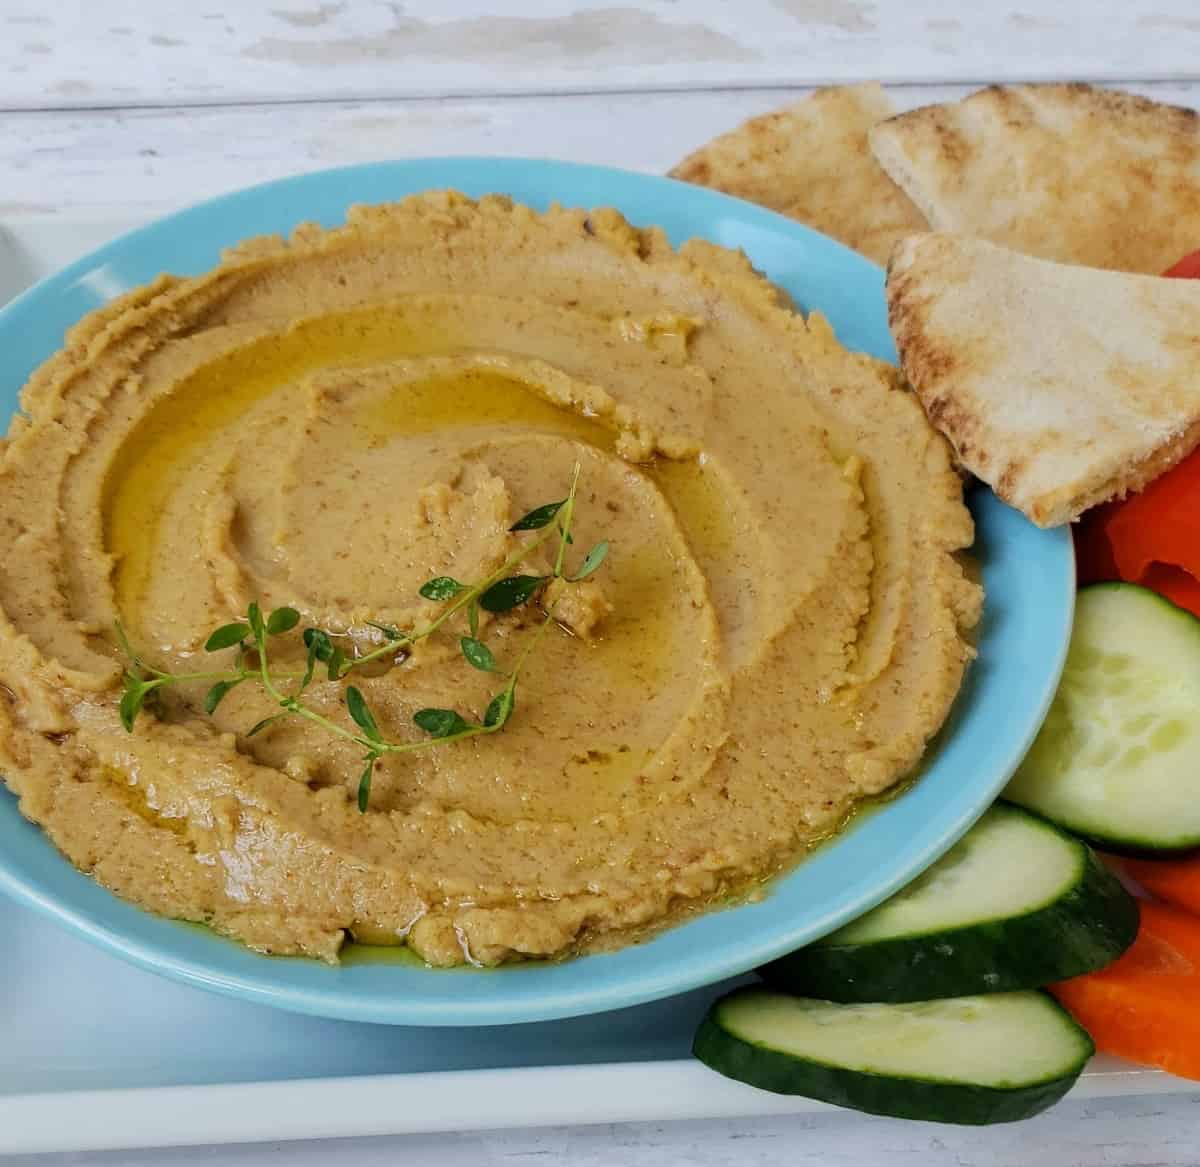 Peanut hummus spread on blue plate with pita chip on the right side.